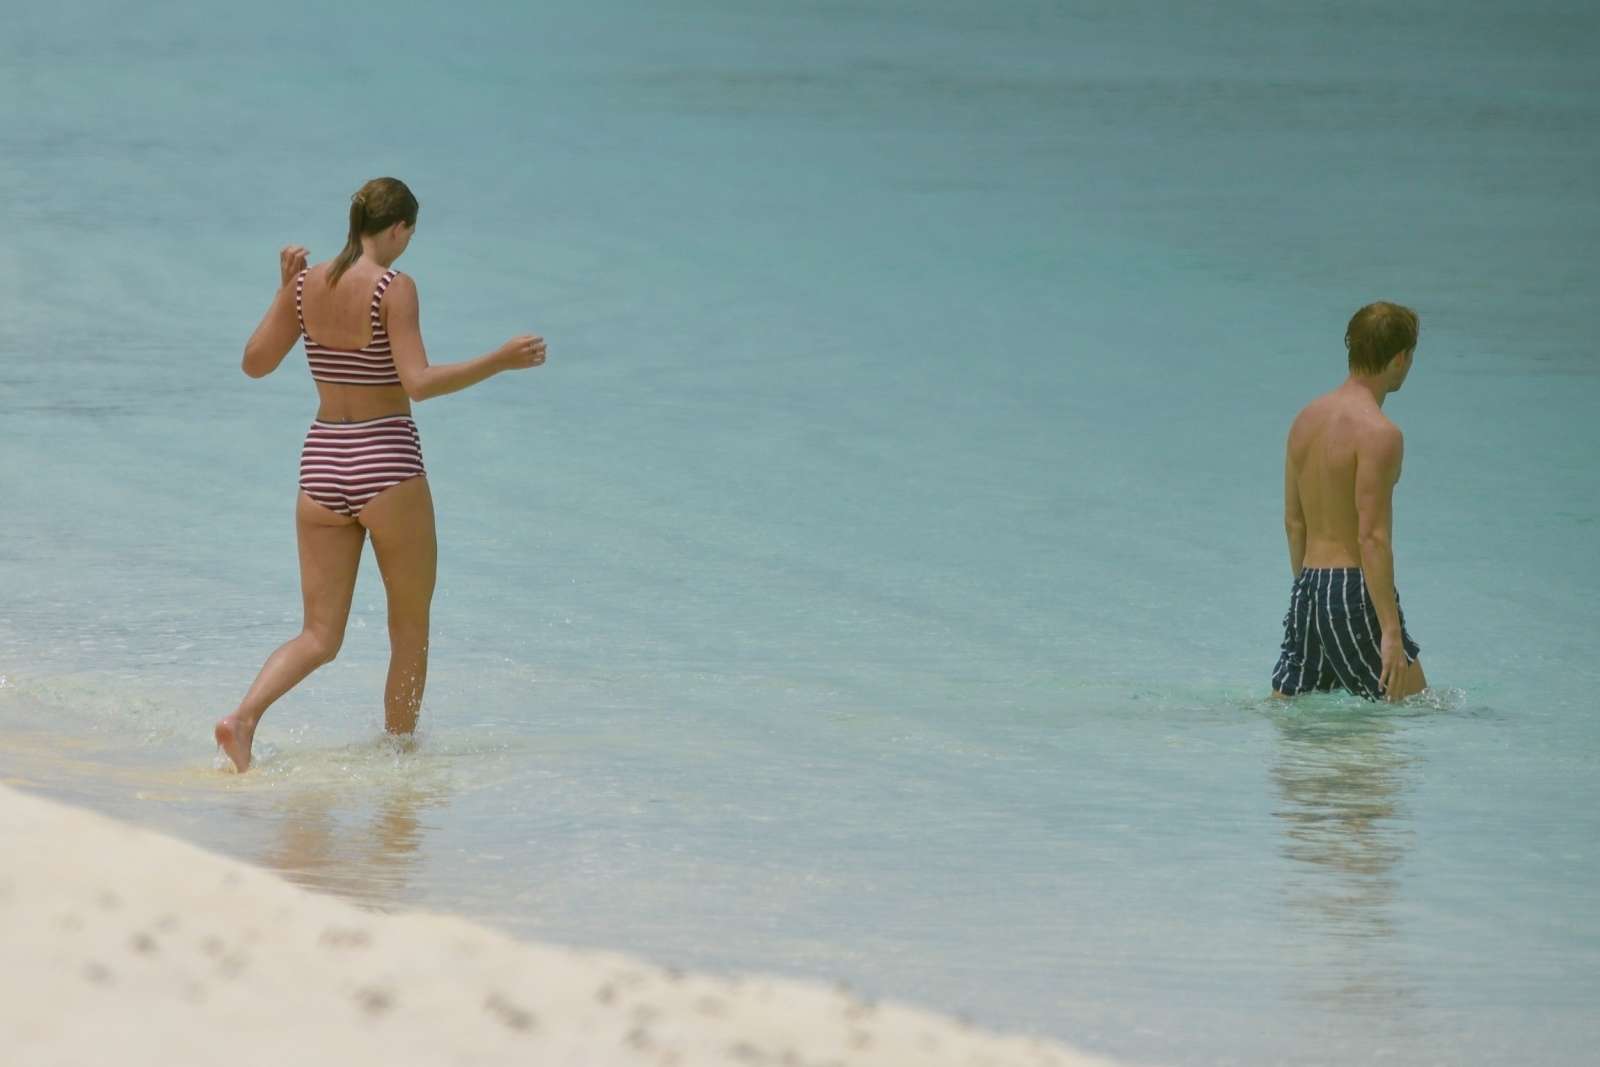 Taylor Swift in Bikini at the beach in Turks and Caicos